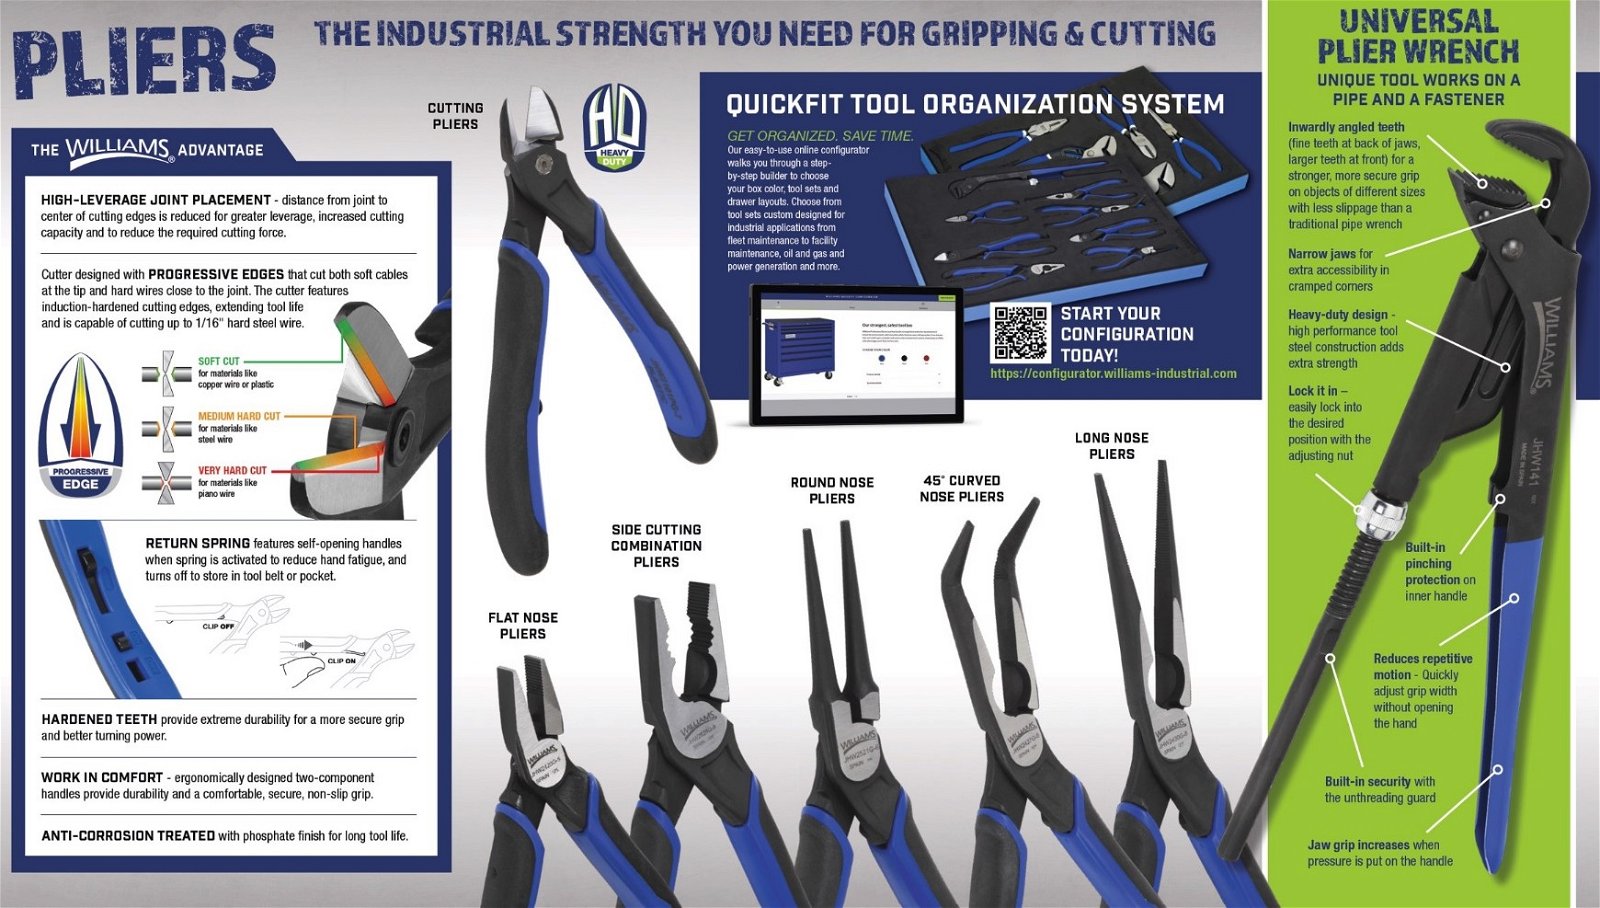 williams-flat-nose-side-cutting-round-nose-curved-long-nose-and-wrench-pliers.jpg